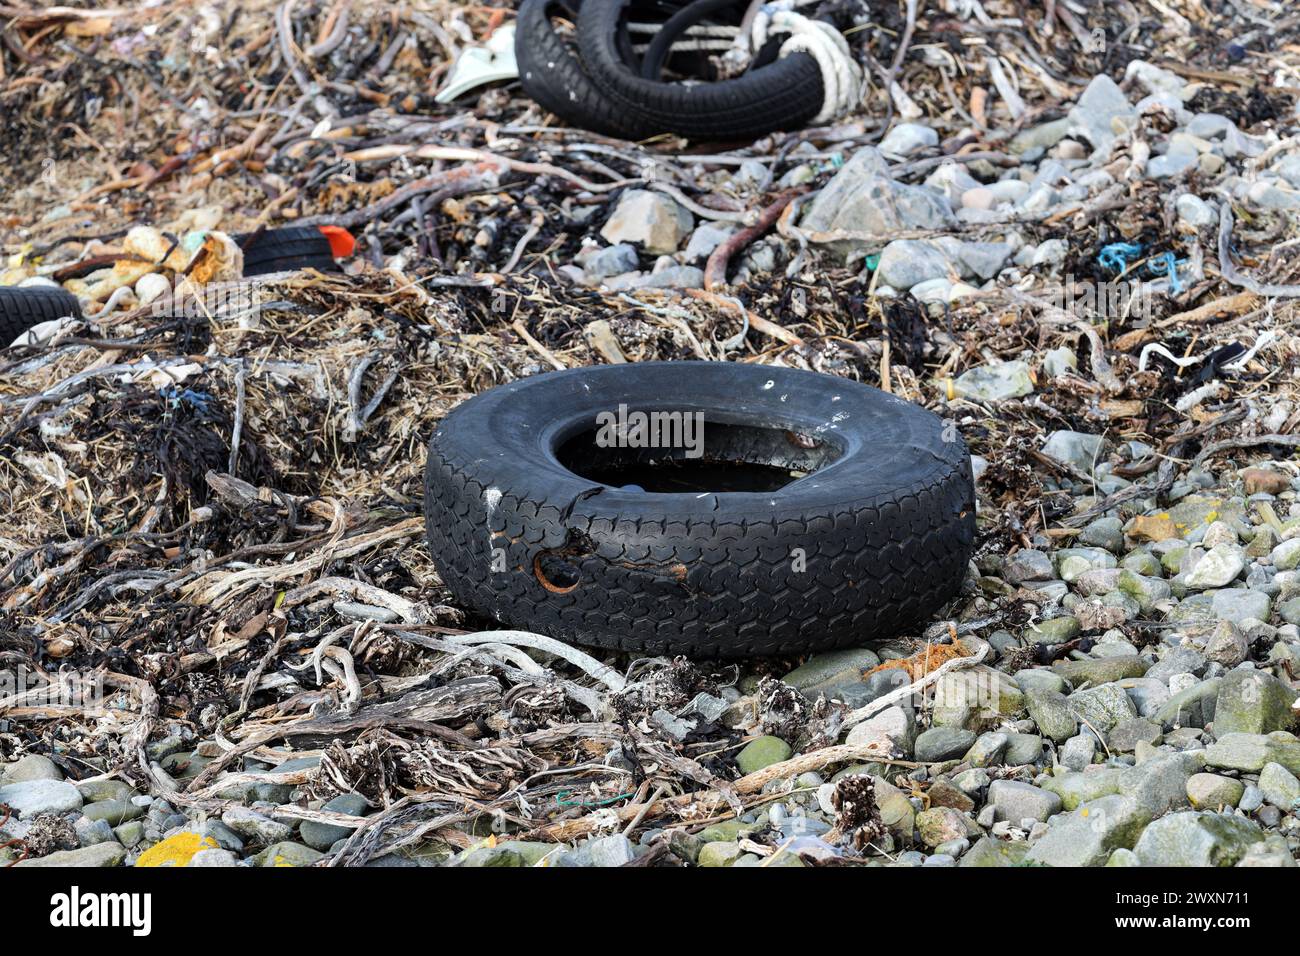 Plastics, tyres used to protect the sides of fishing boats and other waste washed up on the coast near Fraserburgh, Aberdeenshire, Scotland, UK. Stock Photo